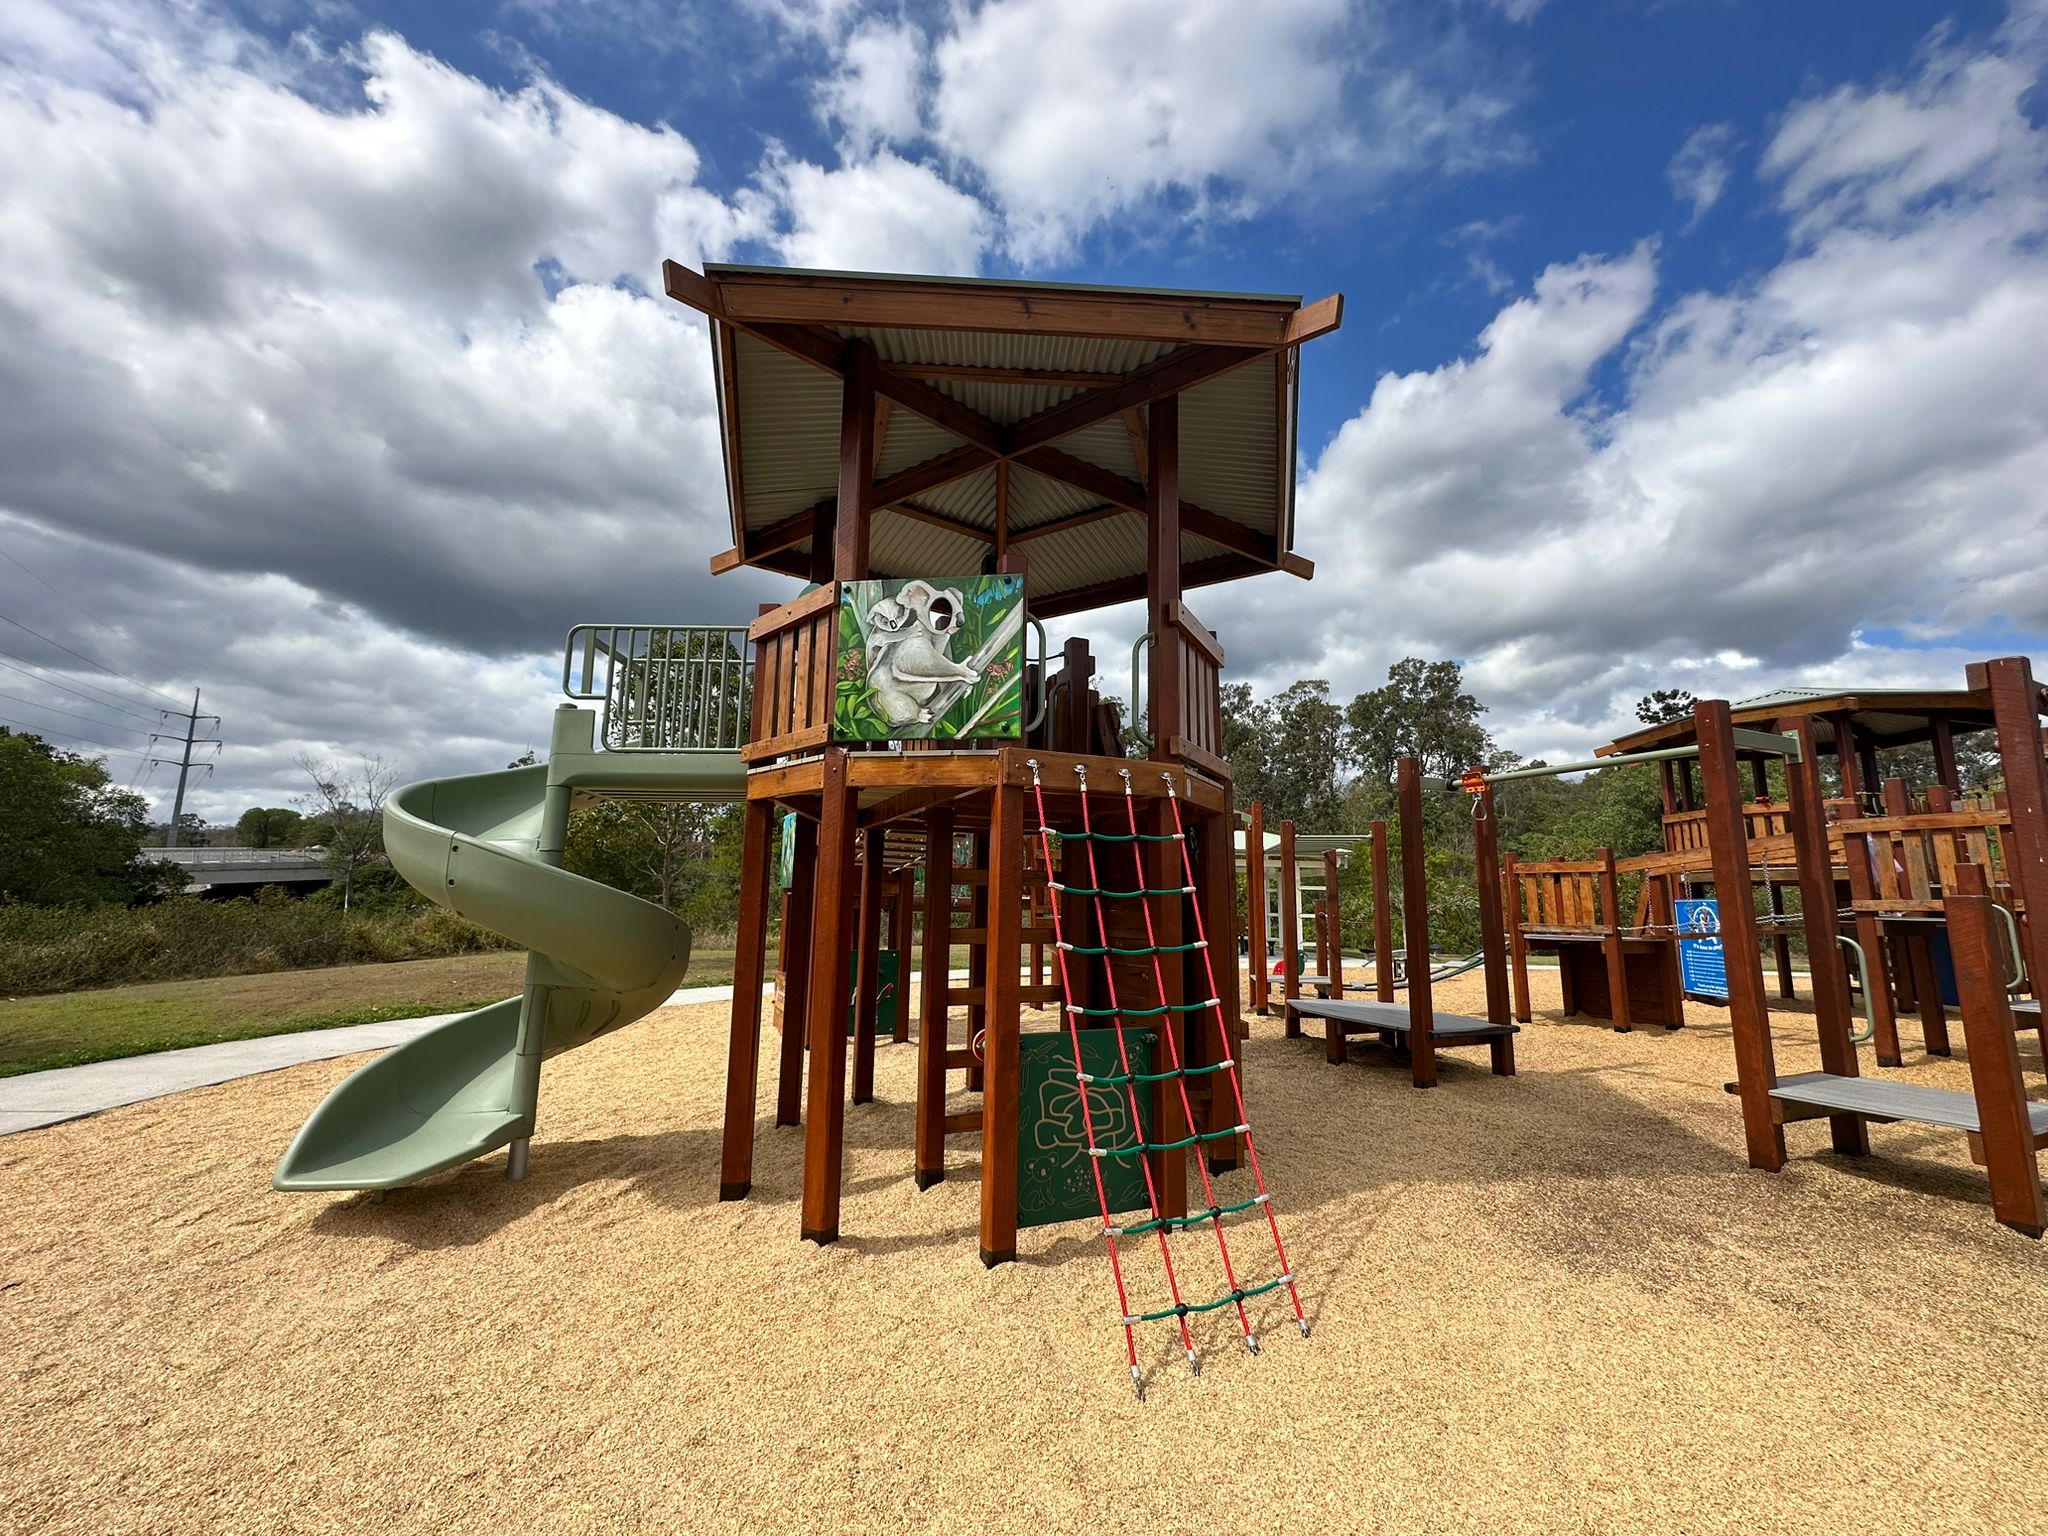 Honeyeater Park Playground featuring Tower, slide, and climbing features.